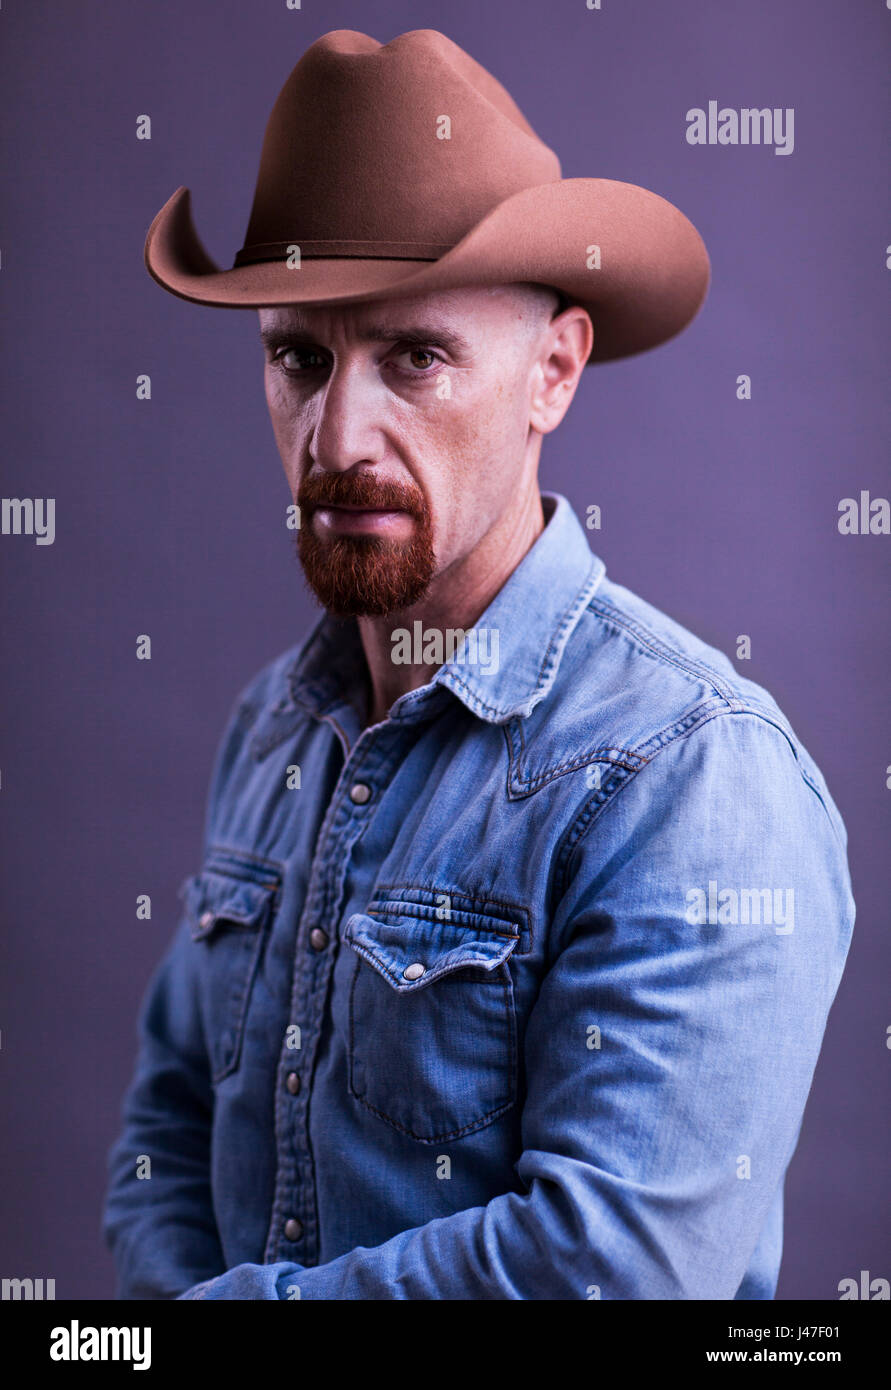 Cowboy with Red Goatee in Blue Levi denim chambray shirt and Stetson Cowboy  hat Stock Photo - Alamy